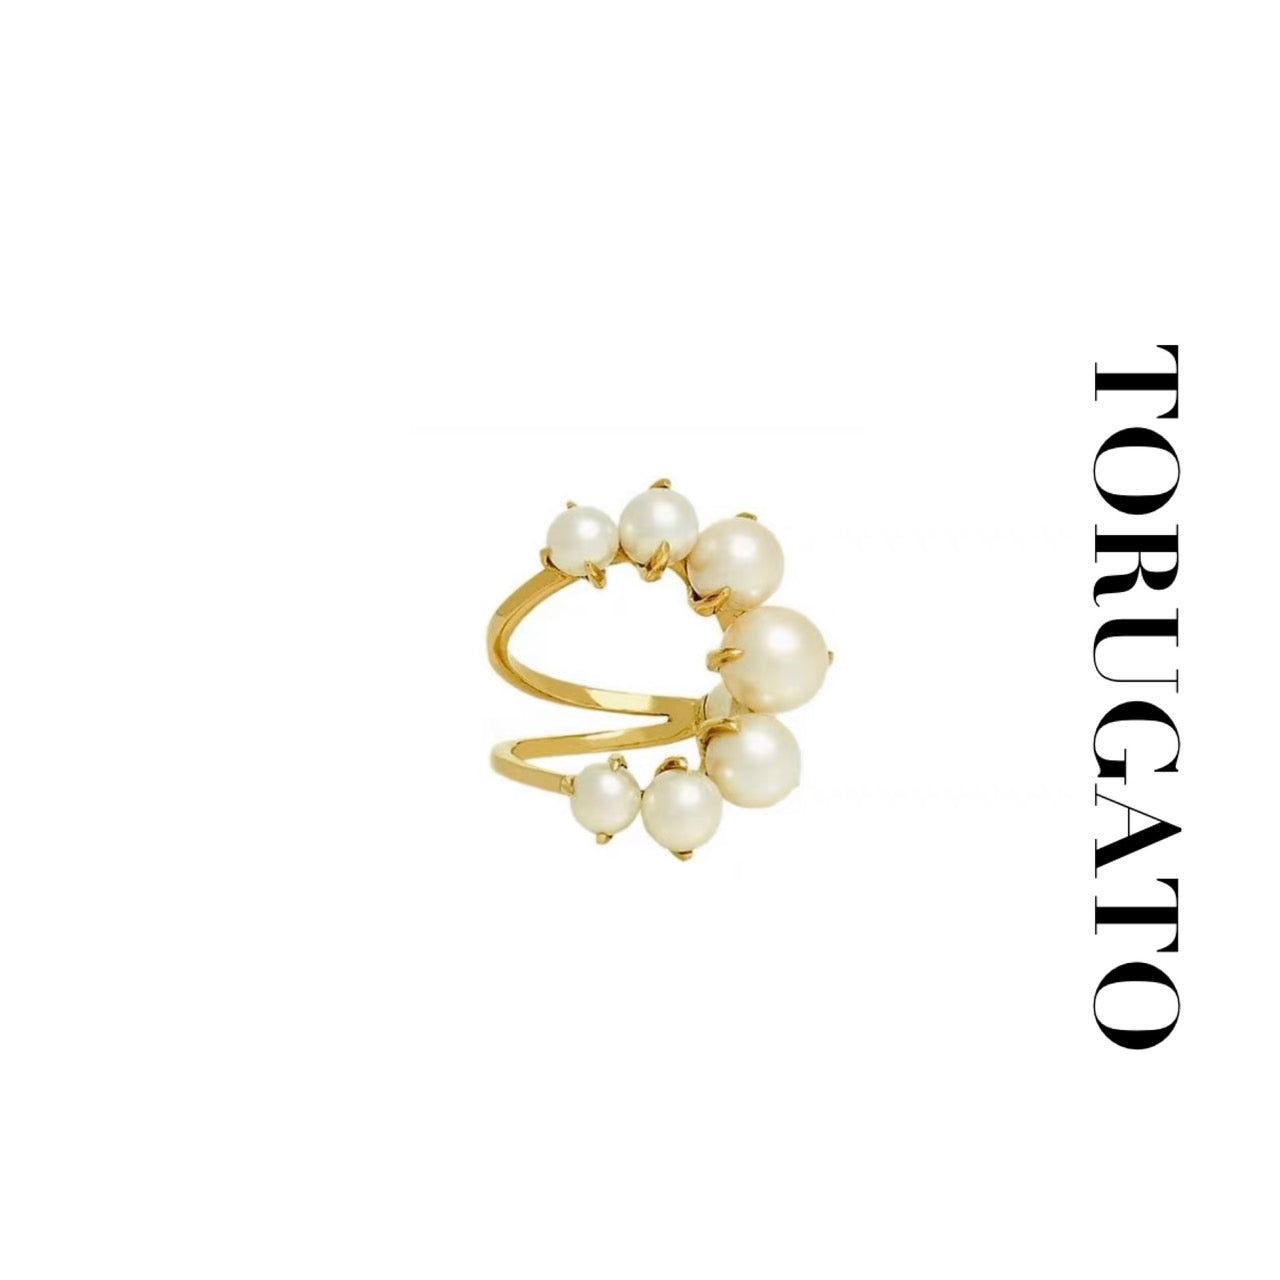 C-shaped pearl ring